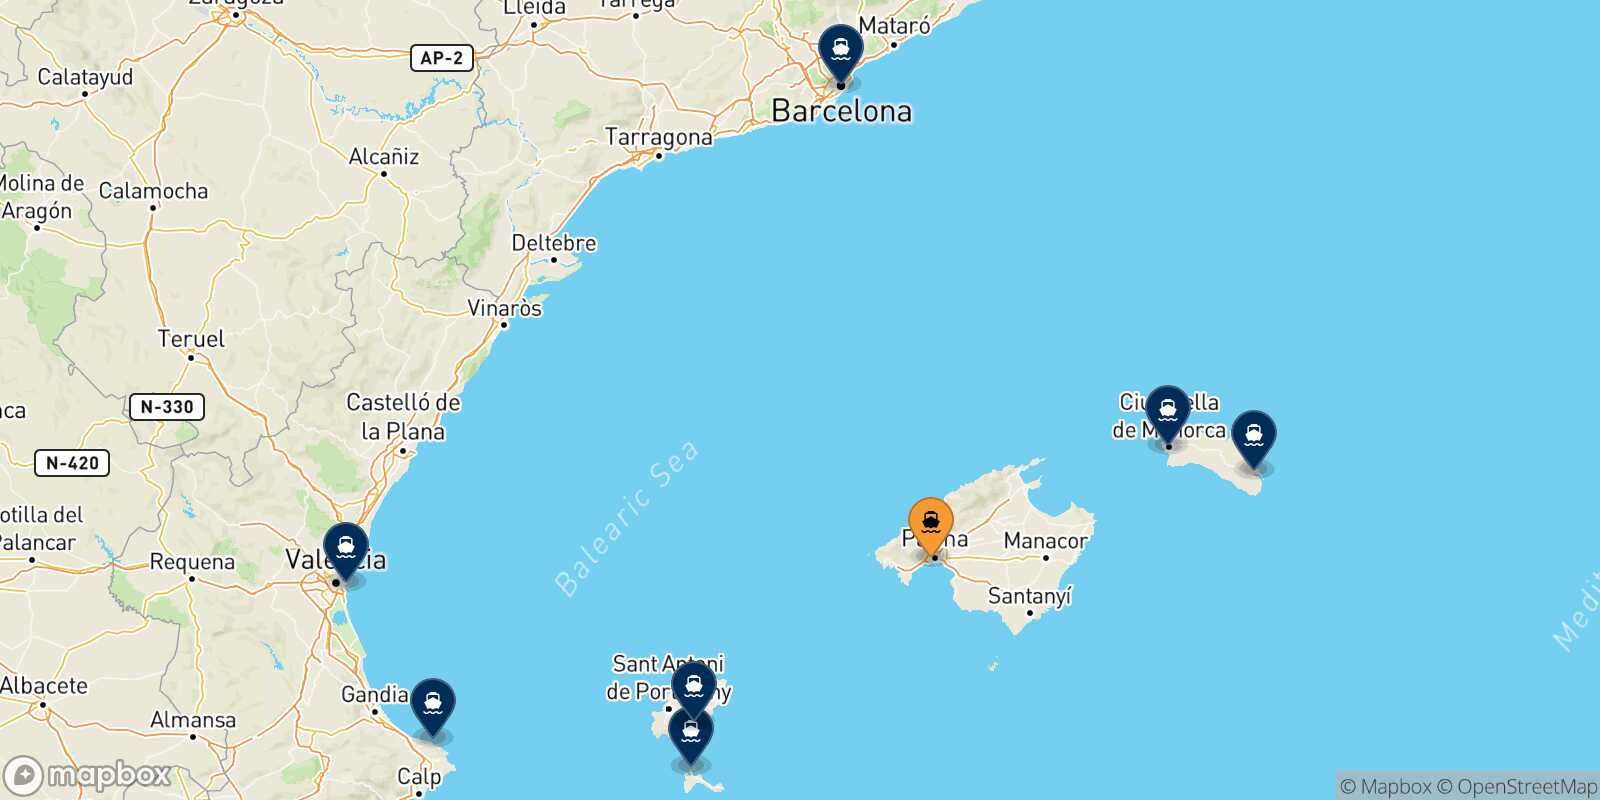 Map of the destinations reachable from Palma